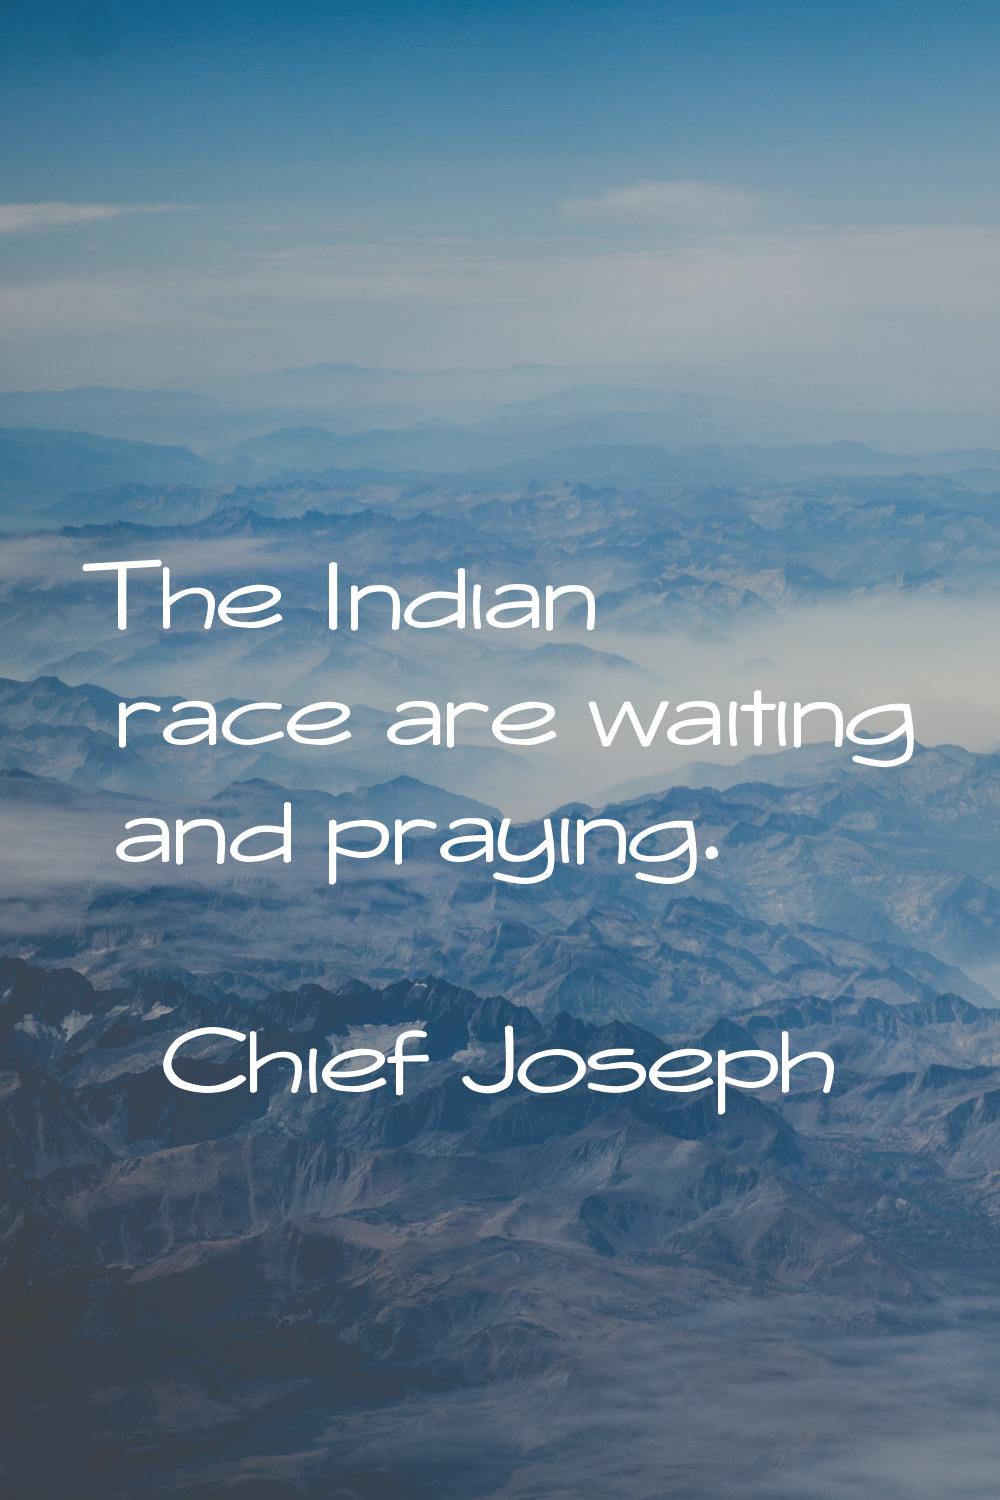 The Indian race are waiting and praying.